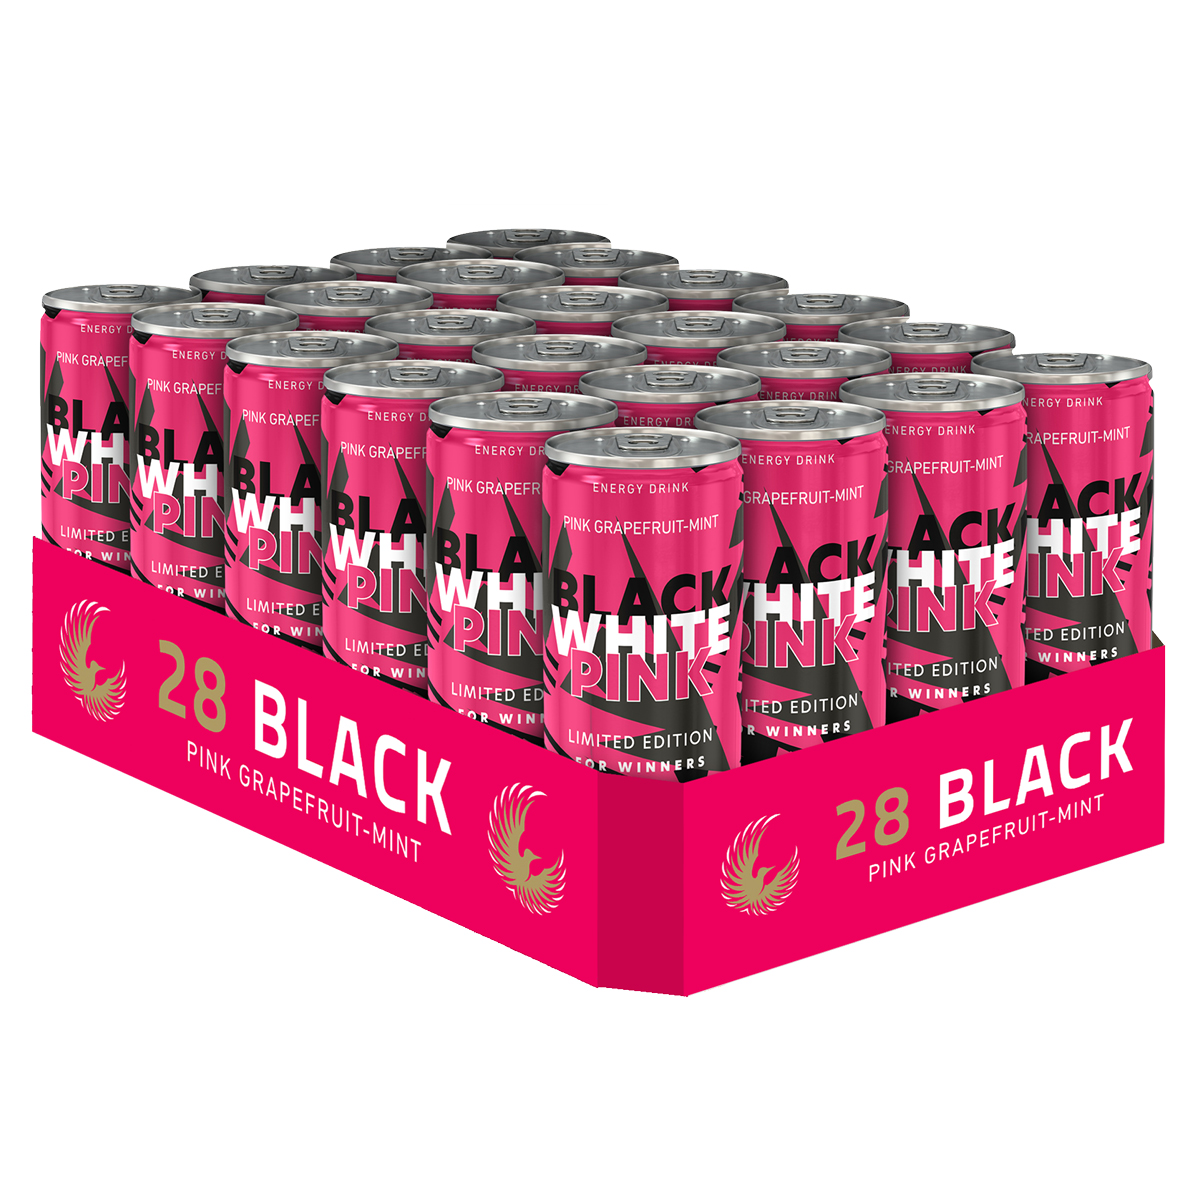 UNICORNS OF LOVE PINK LIMITED EDITION FOR WINNERS - 28 BLACK Pink Grapefruit-Mint 330ml - 24er Tray